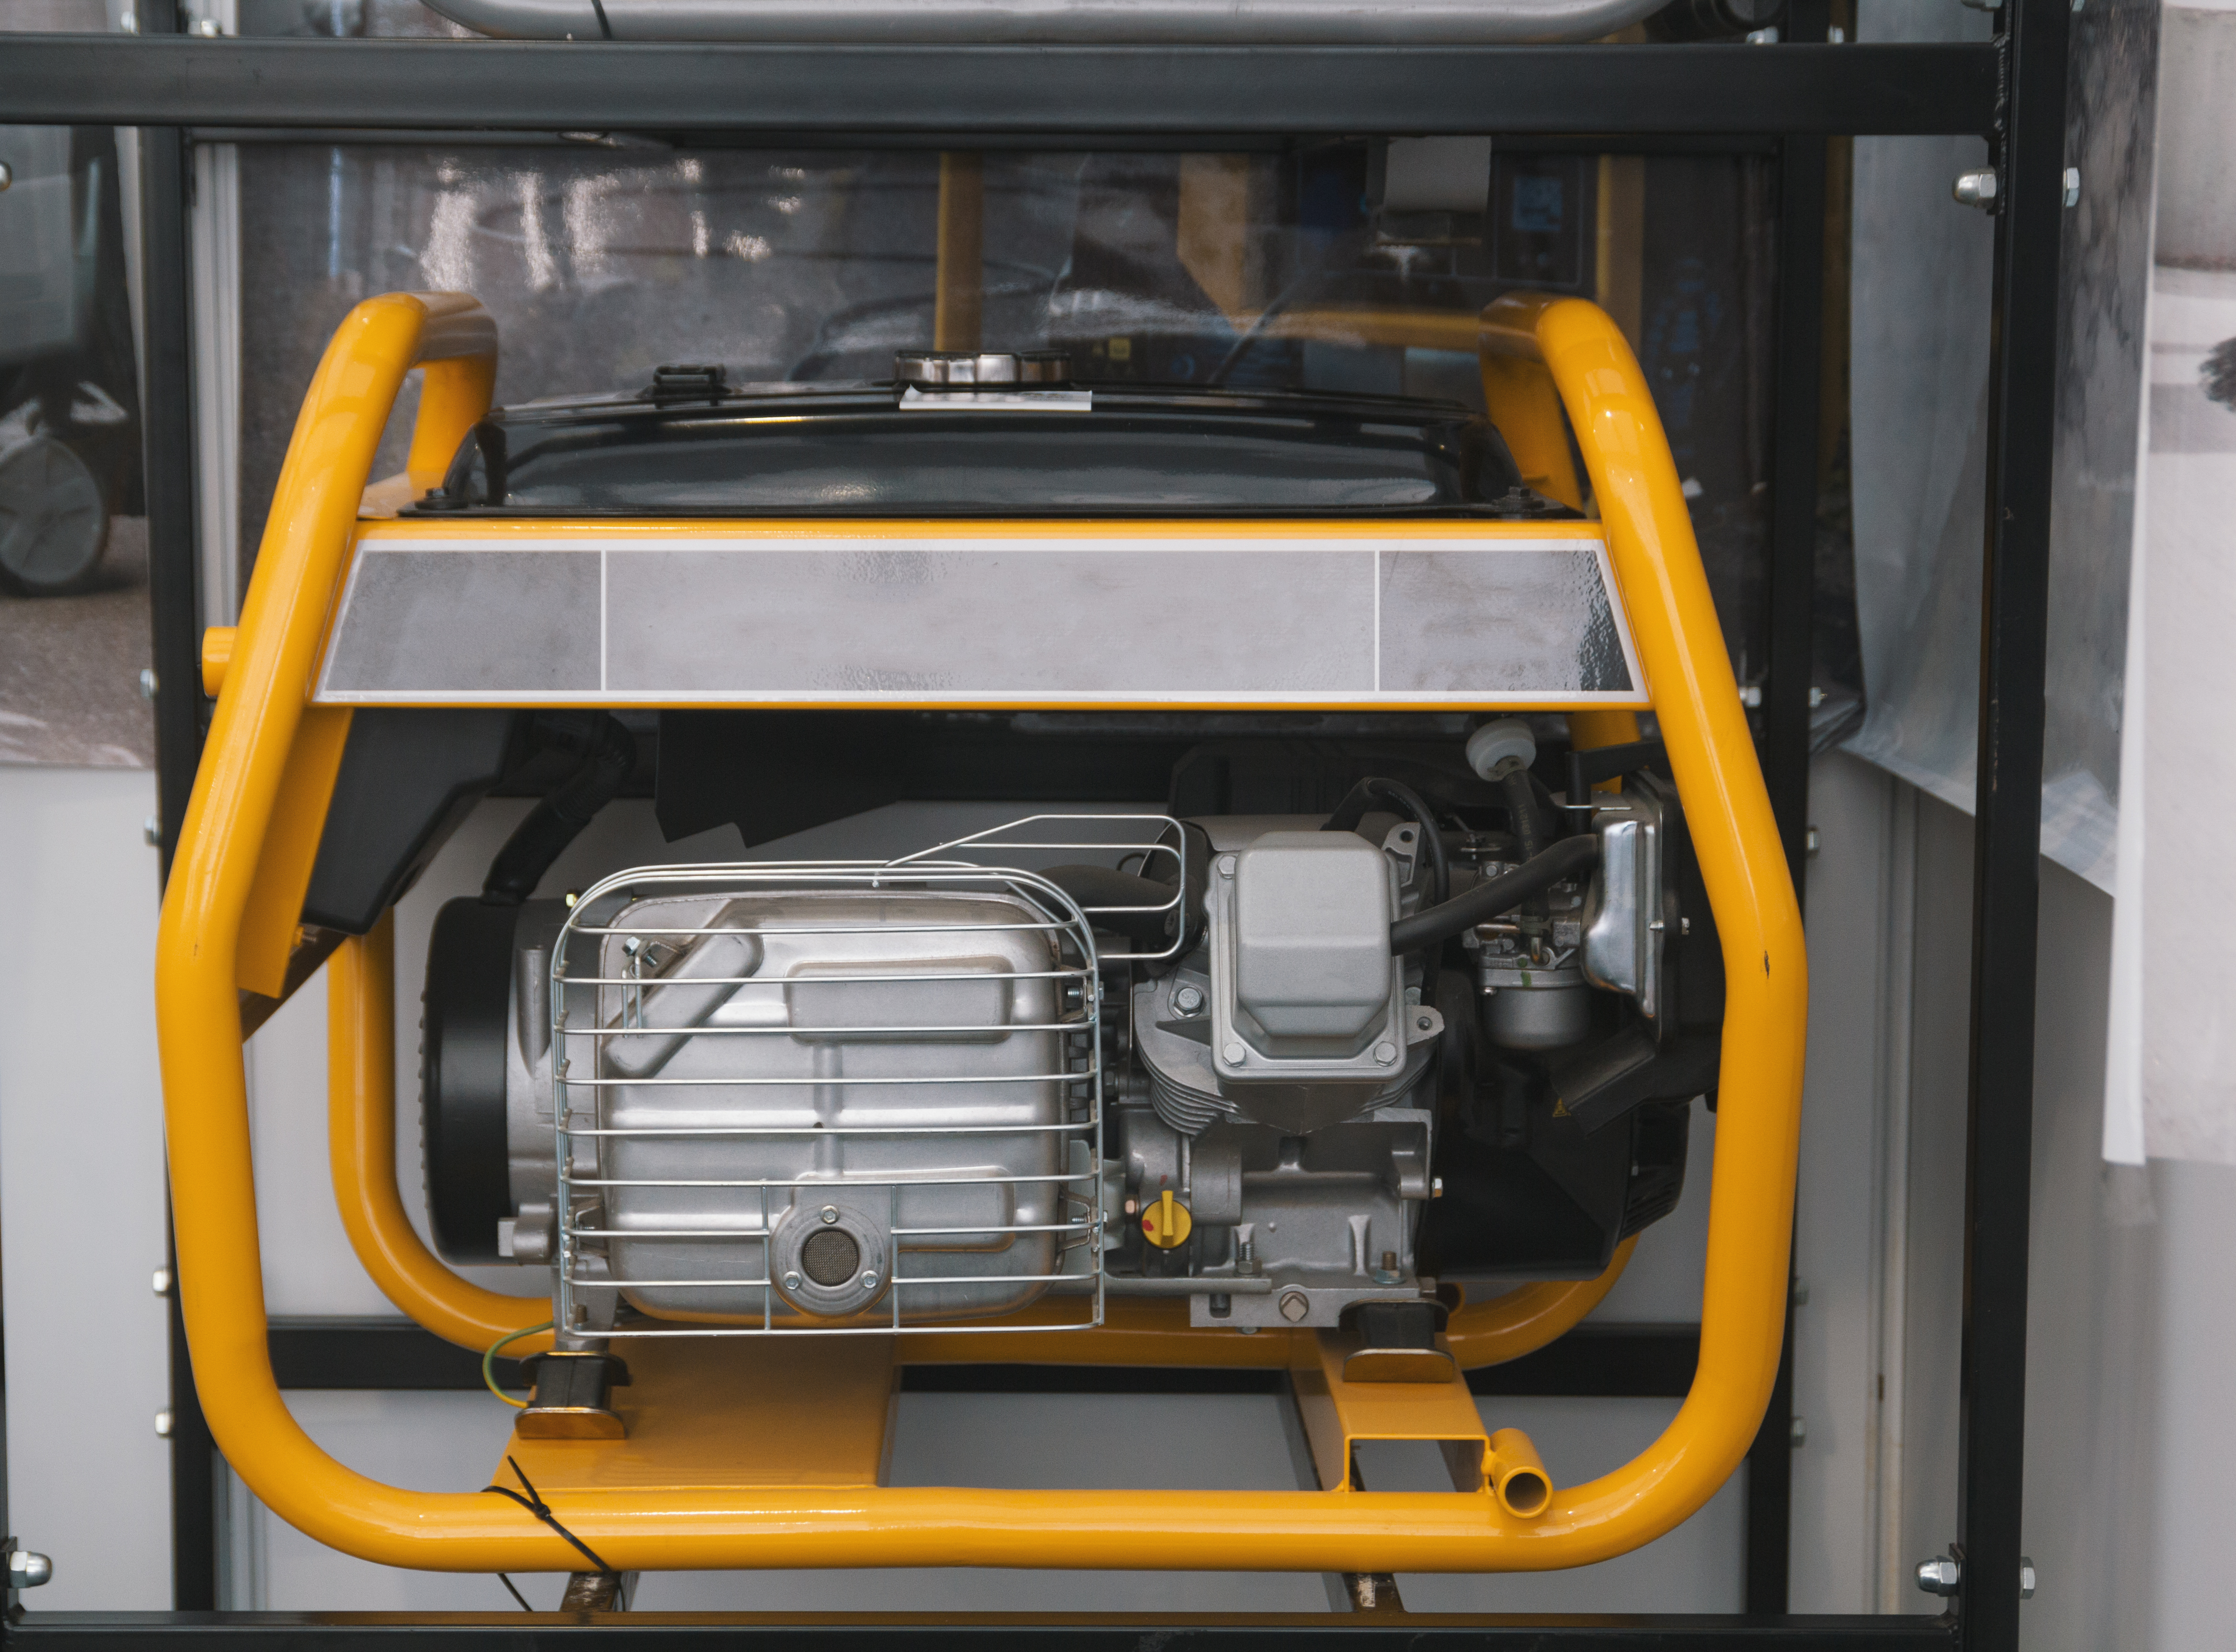 A close-up view of a portable gasoline generator